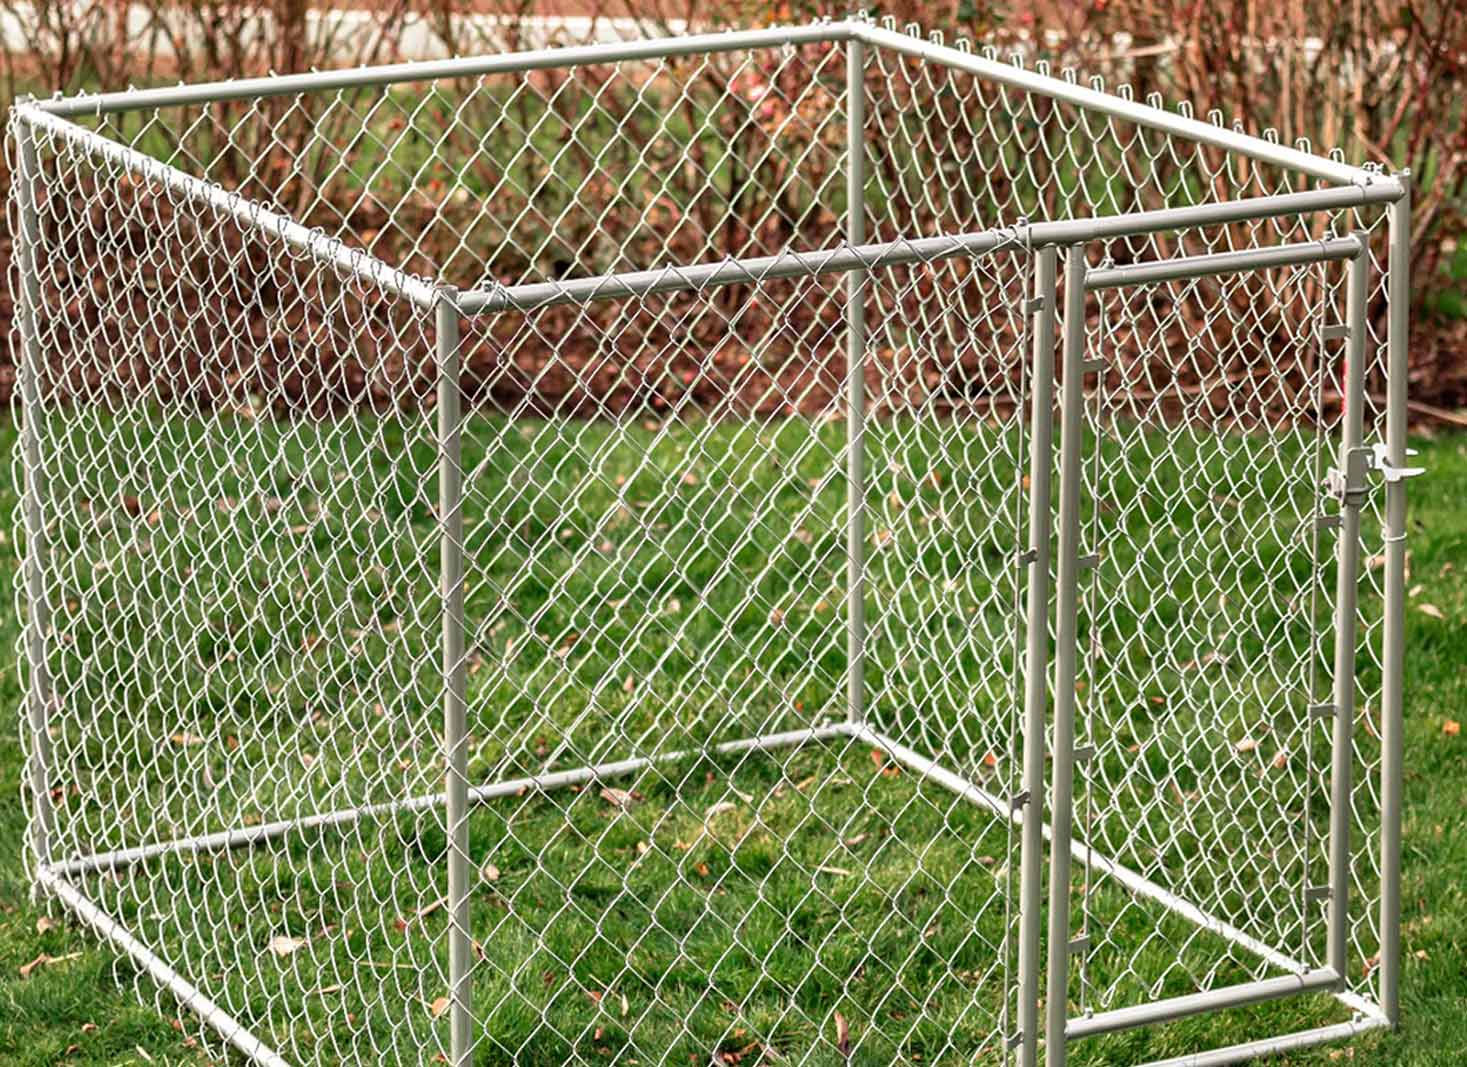 Factors to Consider When Choosing a Chain Link Fence for Dogs